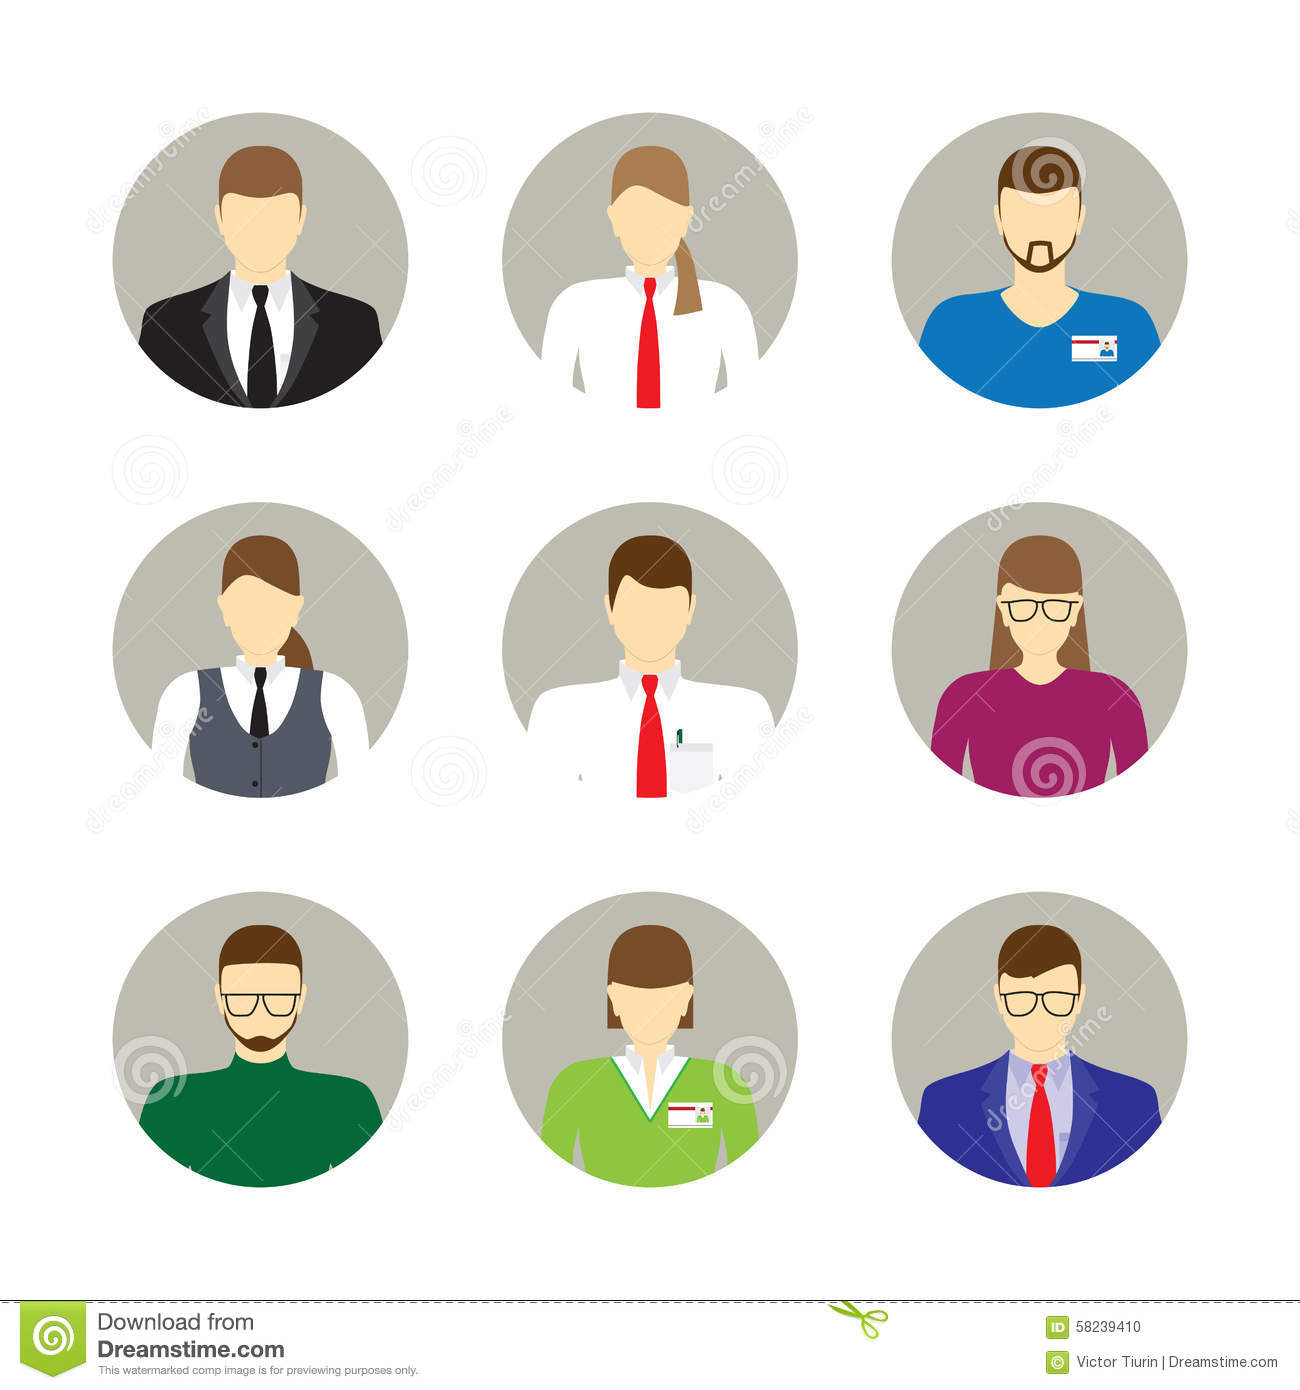 Business People Avatars and Icons